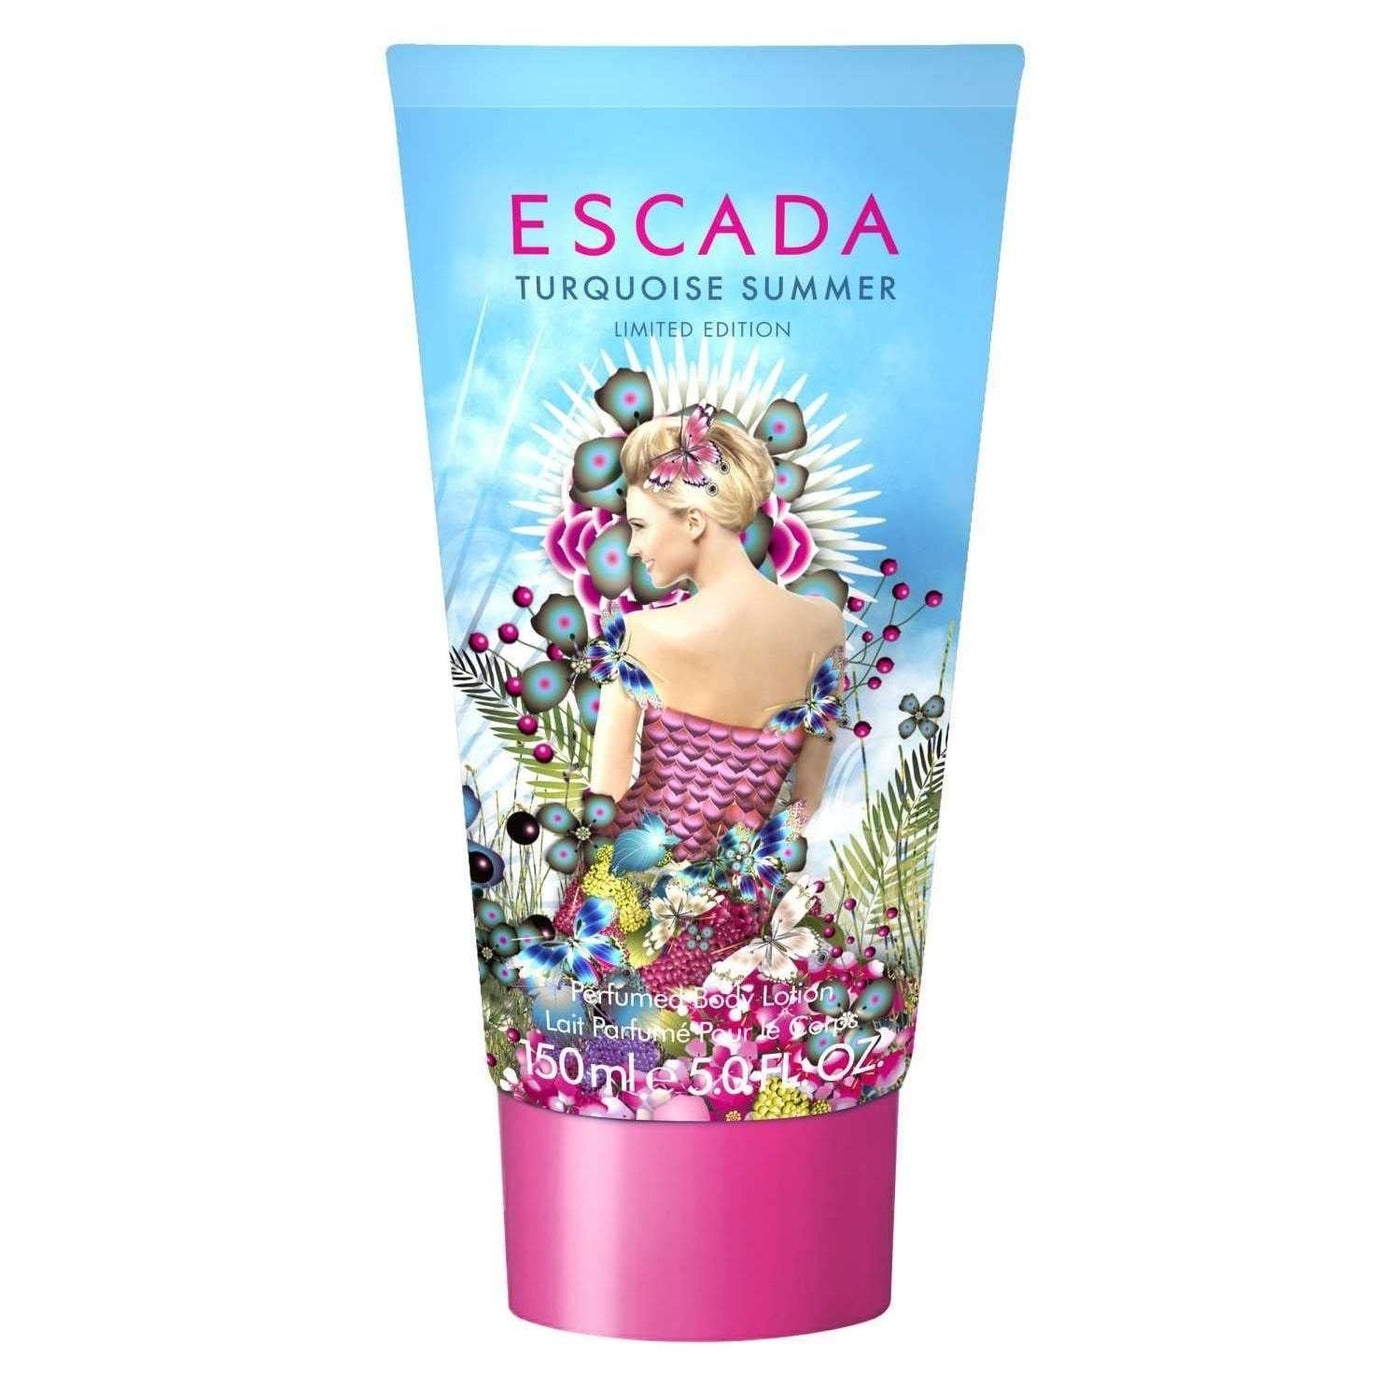 Escada Turquoise Summer Limited Edition For Women 150Ml Body Lotion